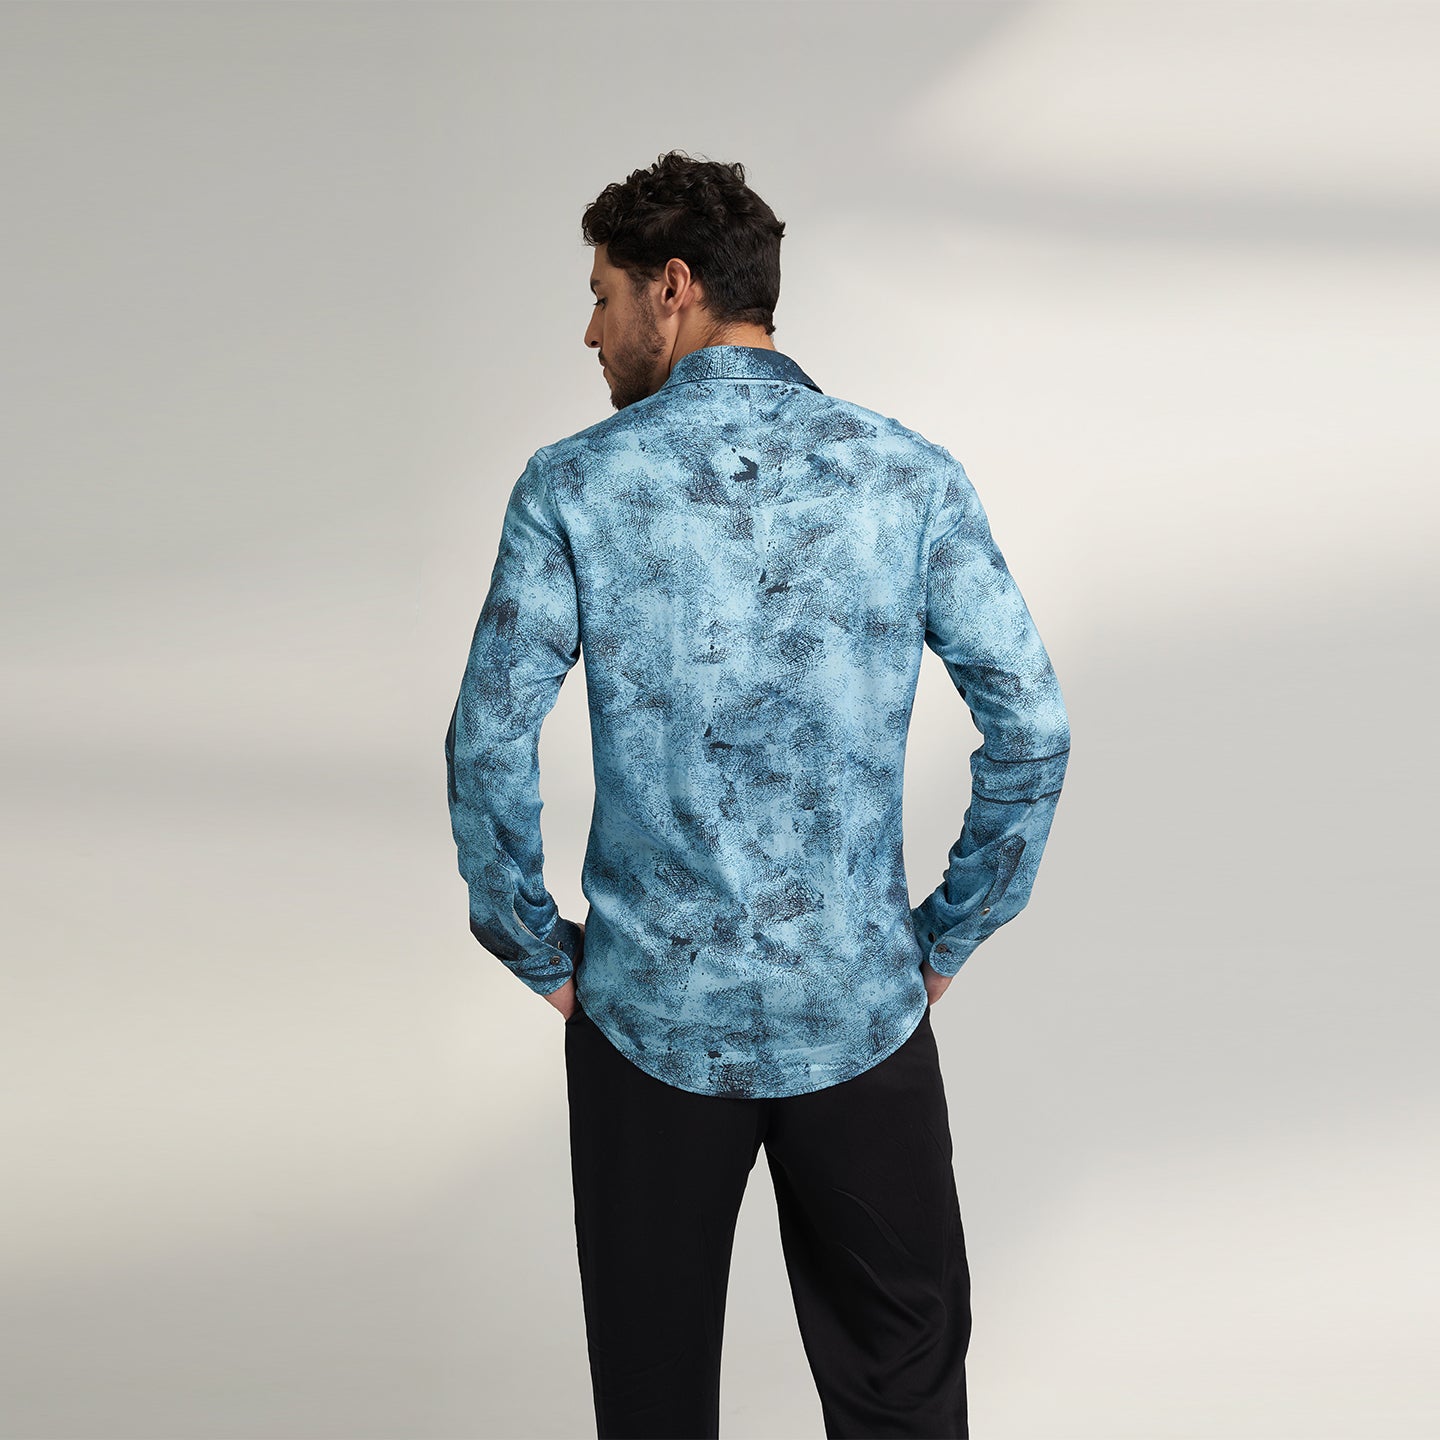 A BLUE AND BLACK PRINTED SHIRT MADE FROM ORGANIC LOTUS STEM FABRIC, PRINTED WITH NON TOXIC GOTS CERTIFIED PRINT. THIS SHIRT HAS A COMFORT FIT